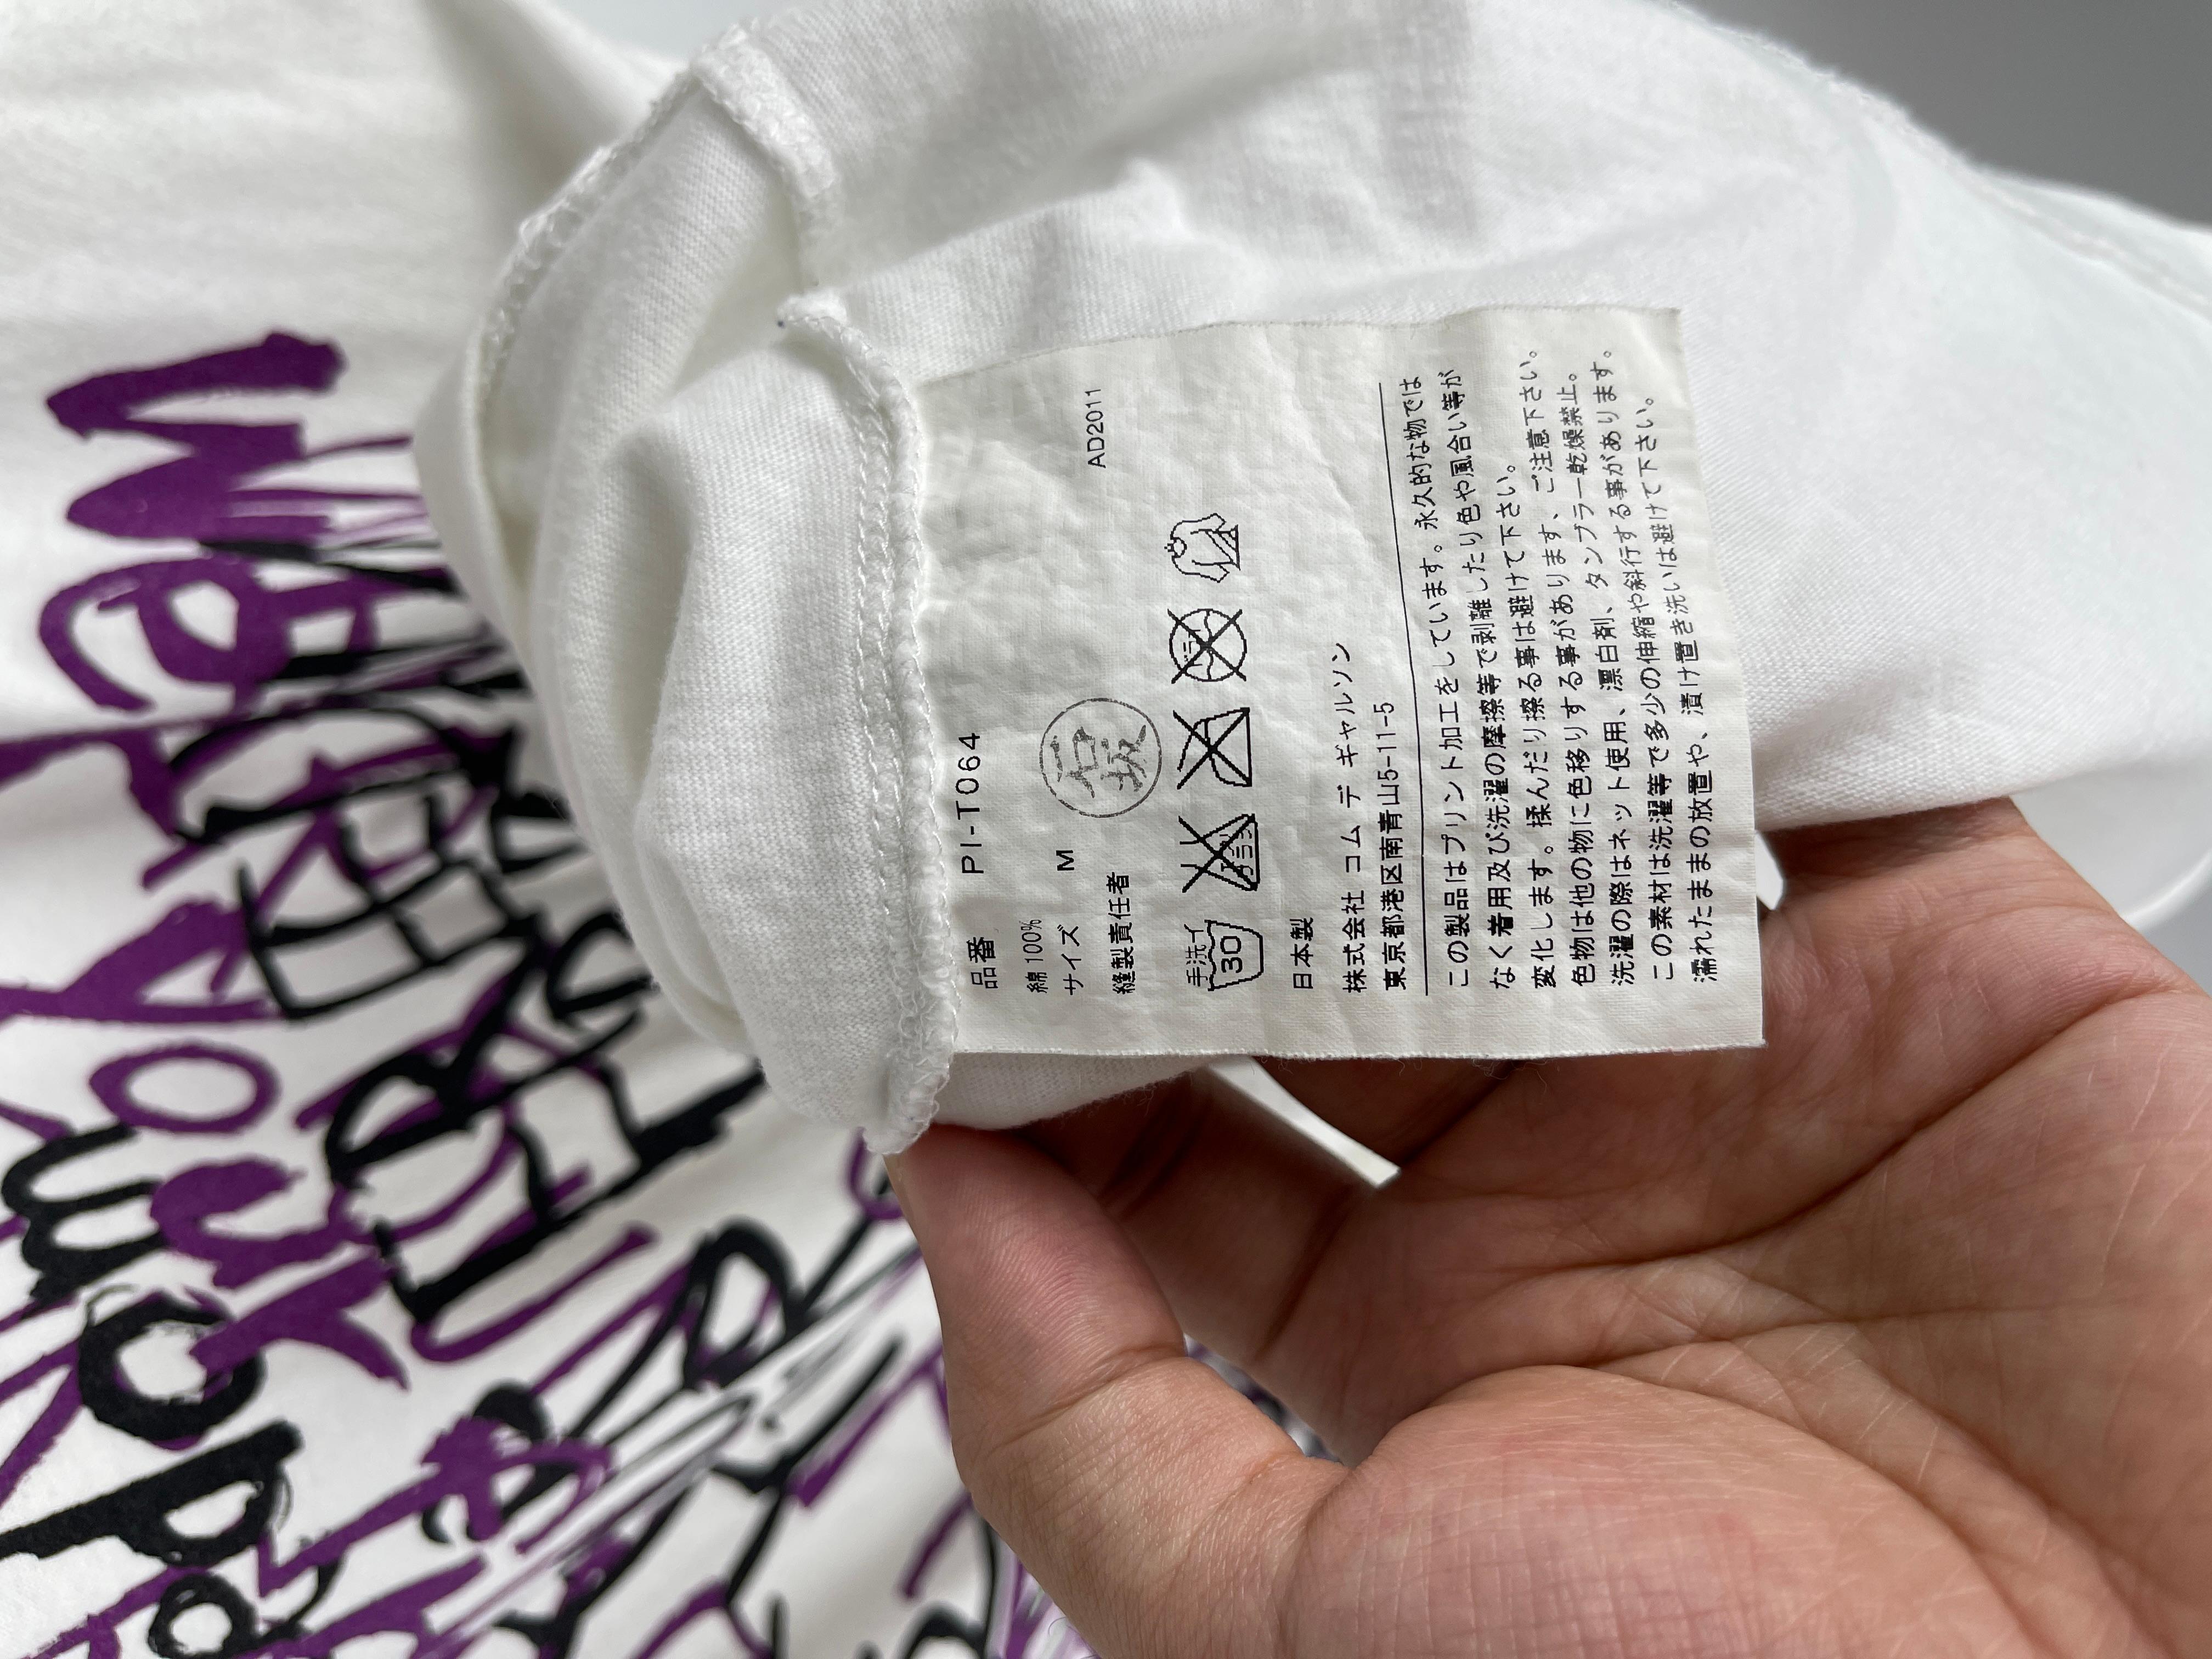 Comme des Garcons S/S2012 Confusion Text T-Shirt In Excellent Condition For Sale In Seattle, WA